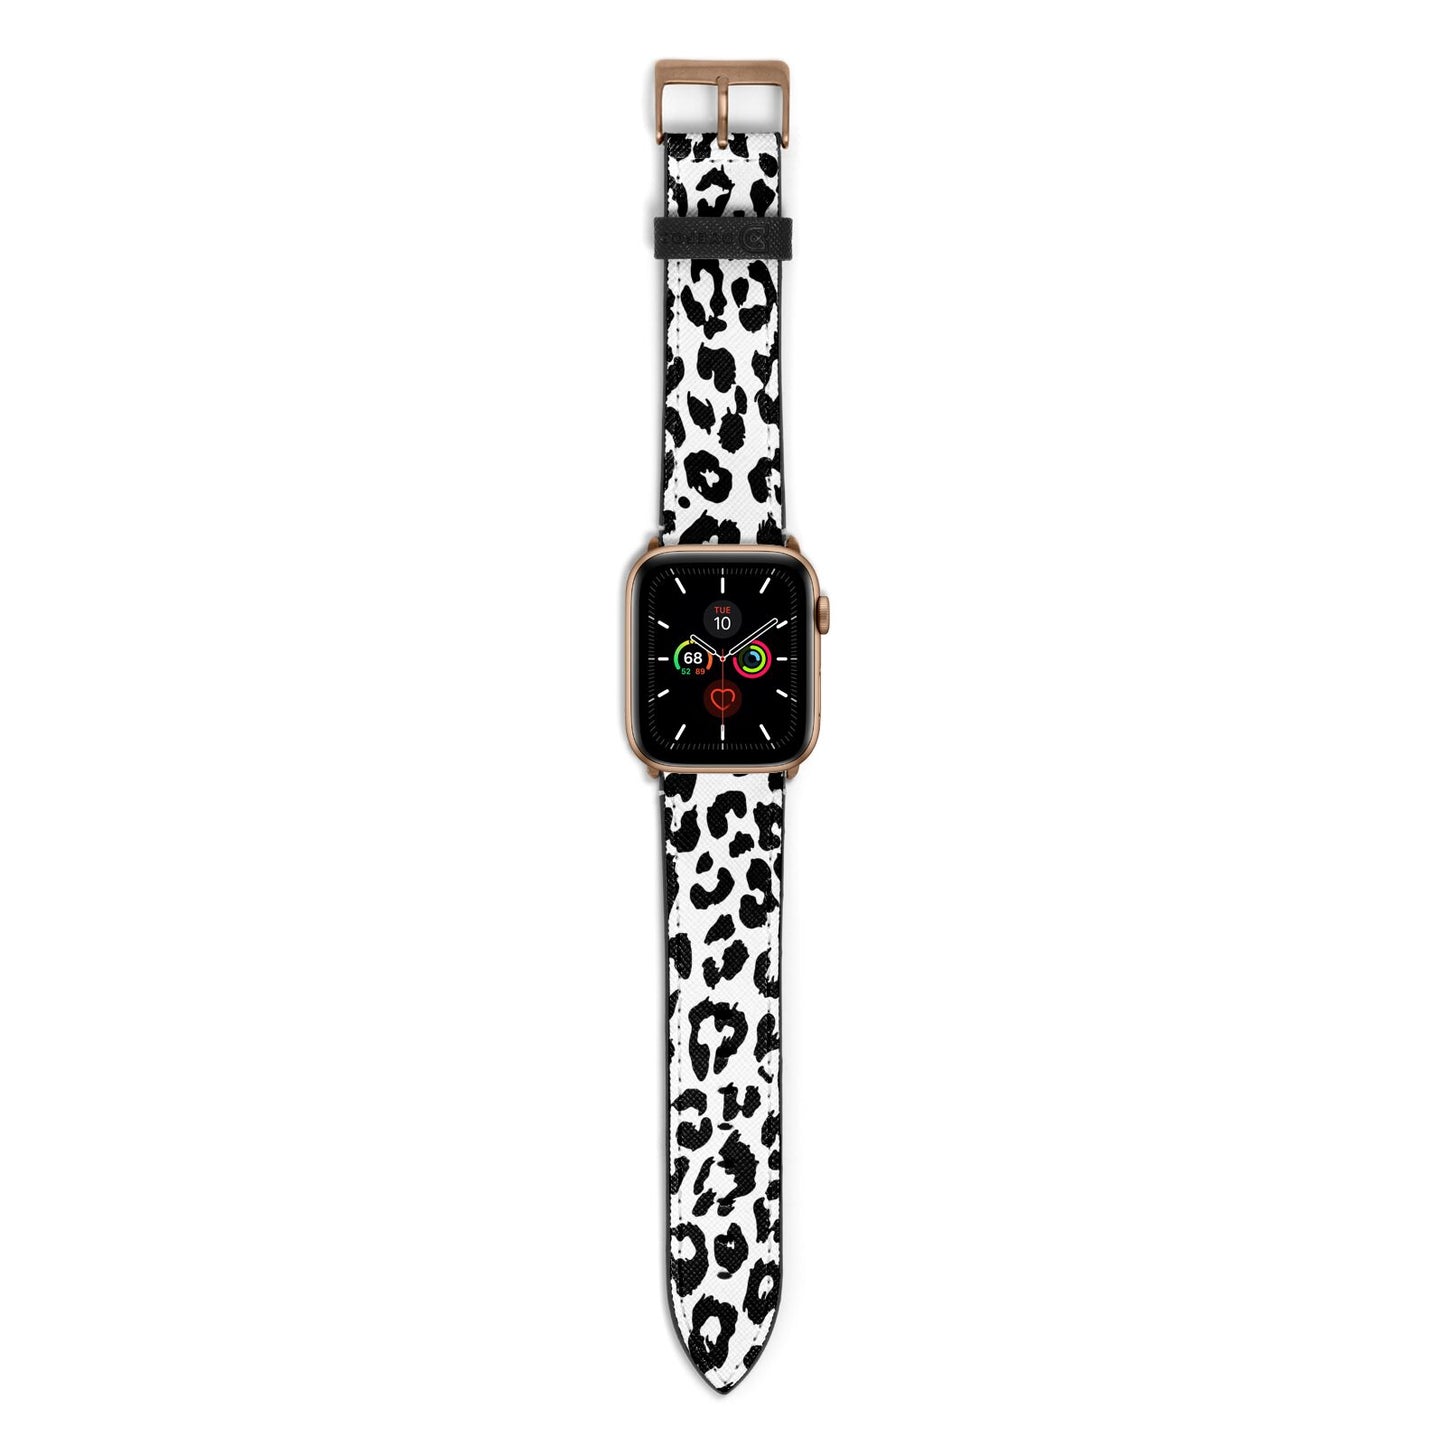 Black Leopard Print Apple Watch Strap with Gold Hardware